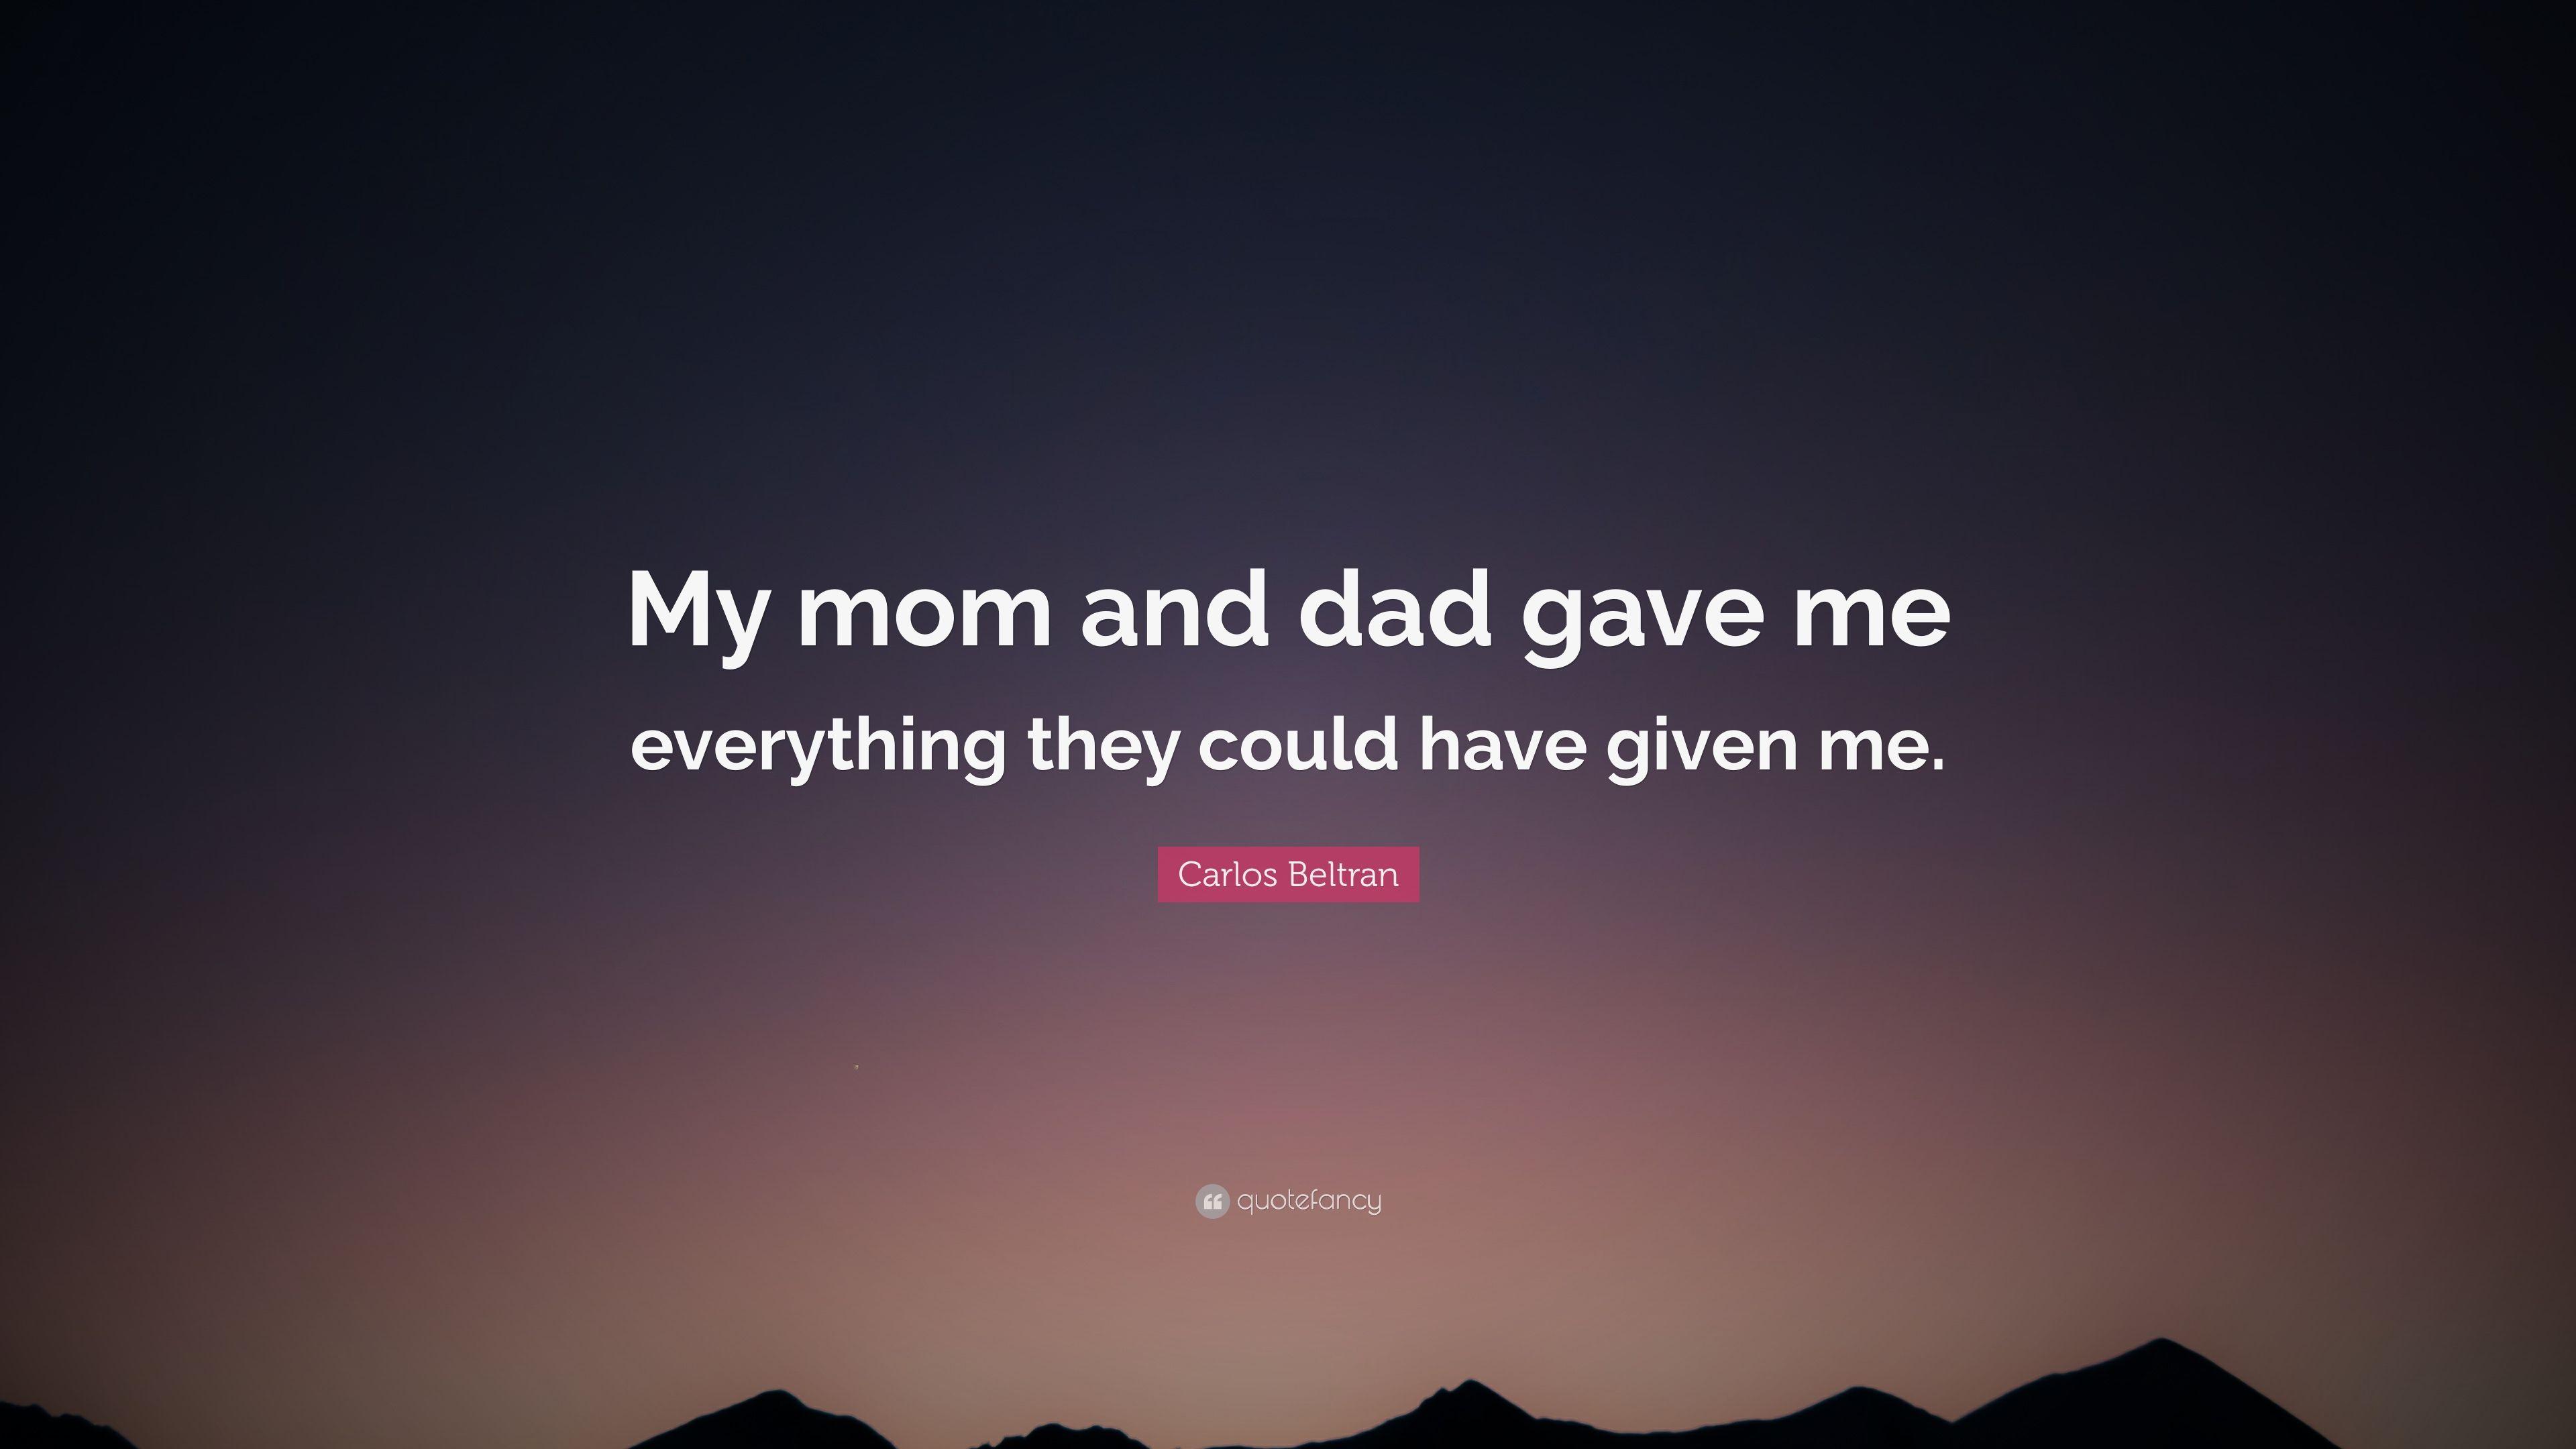 Carlos Beltran Quote: “My mom and dad gave me everything